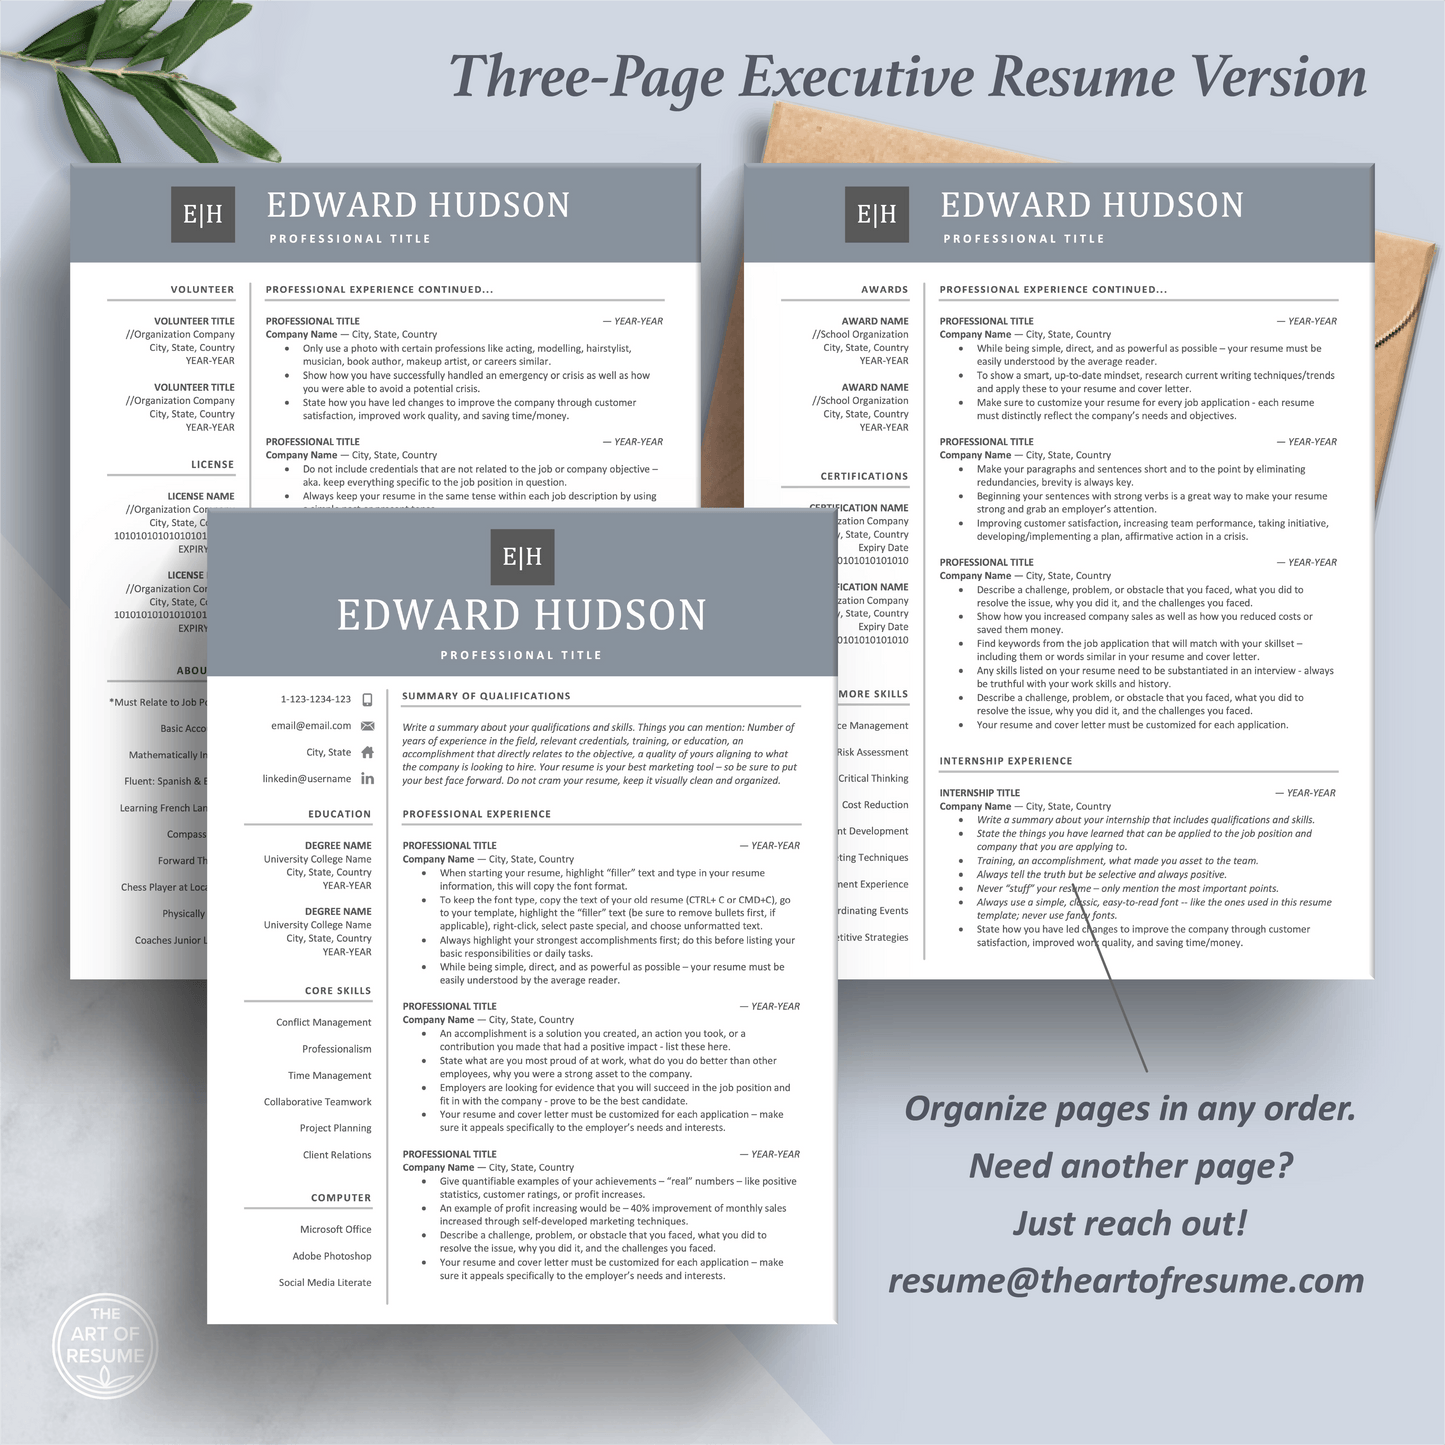 The Art of Resume Templates | Three-Page Executive CEO C-Suite Level Blue Grey Resume CV Template Format | Curriculum Vitae